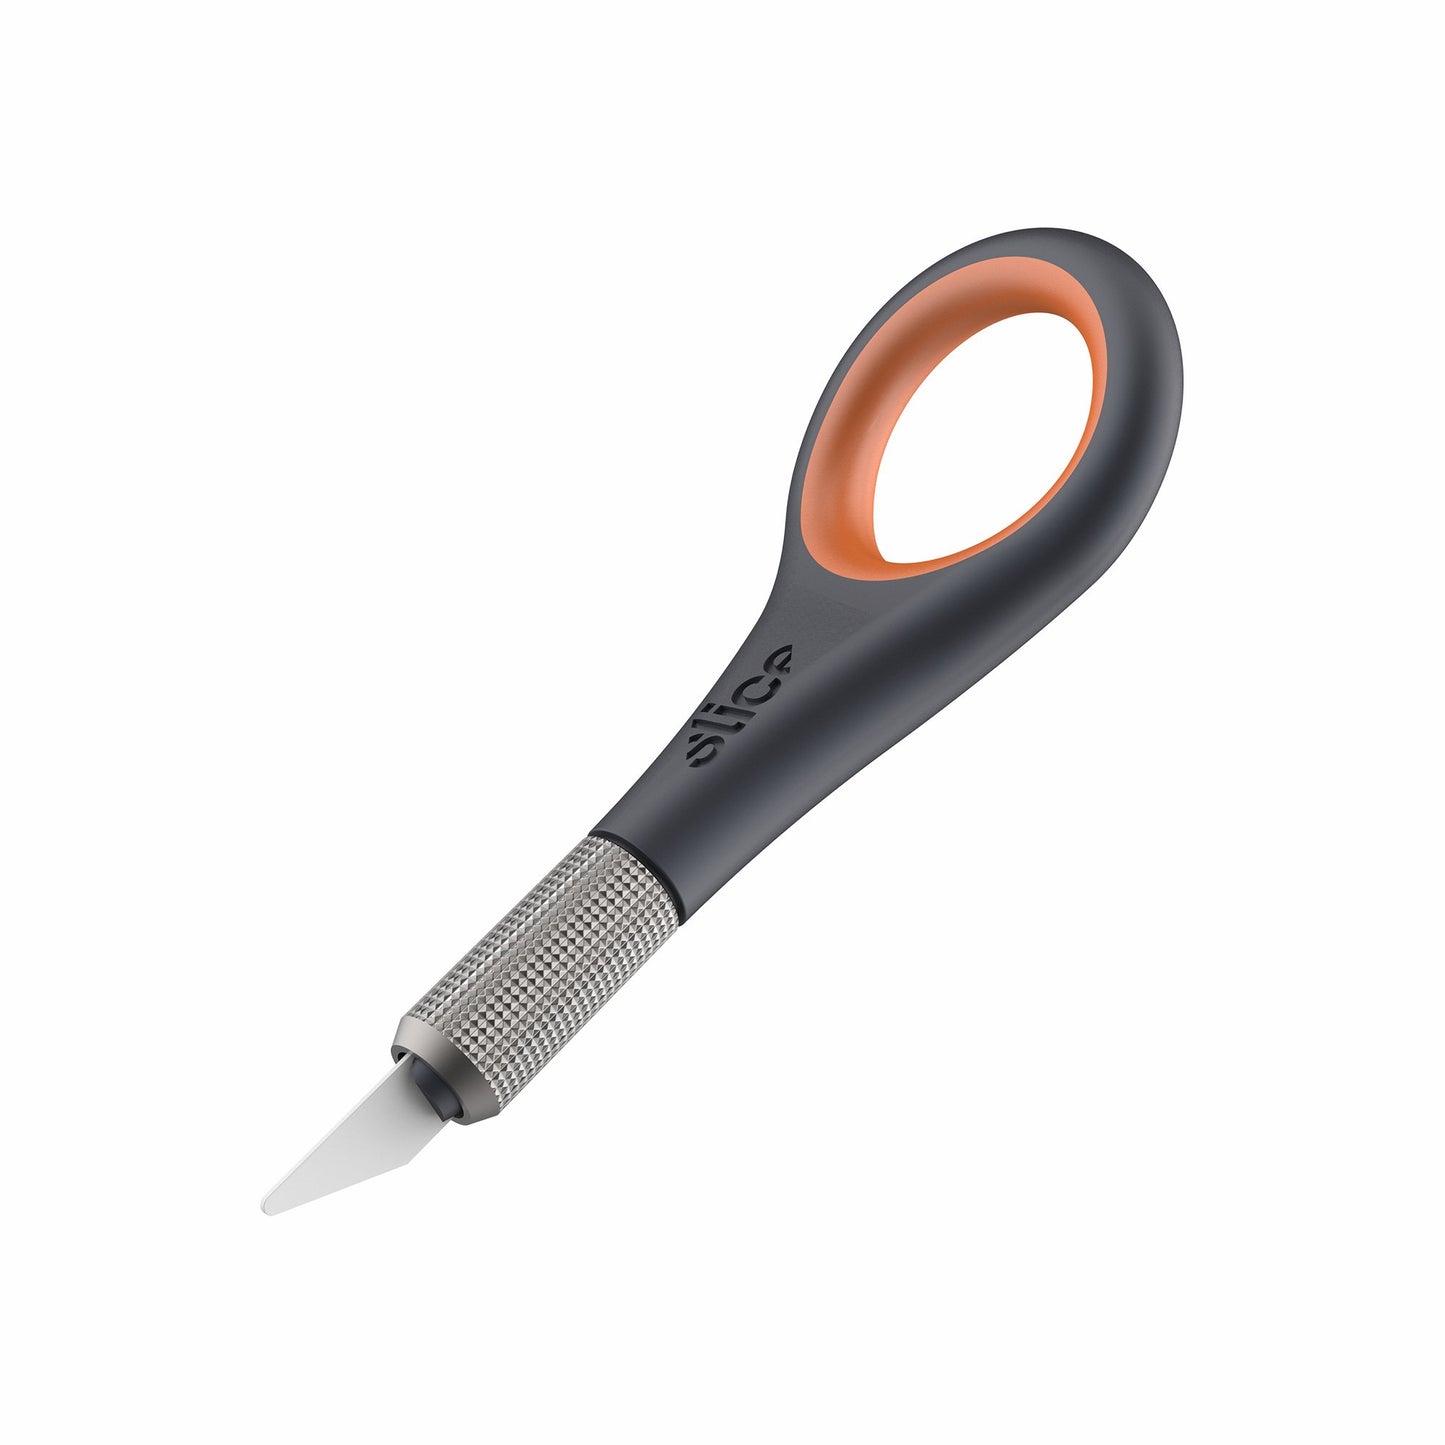 The Slice 10580 Precision Knife with ring-style handle and ceramic safety blade